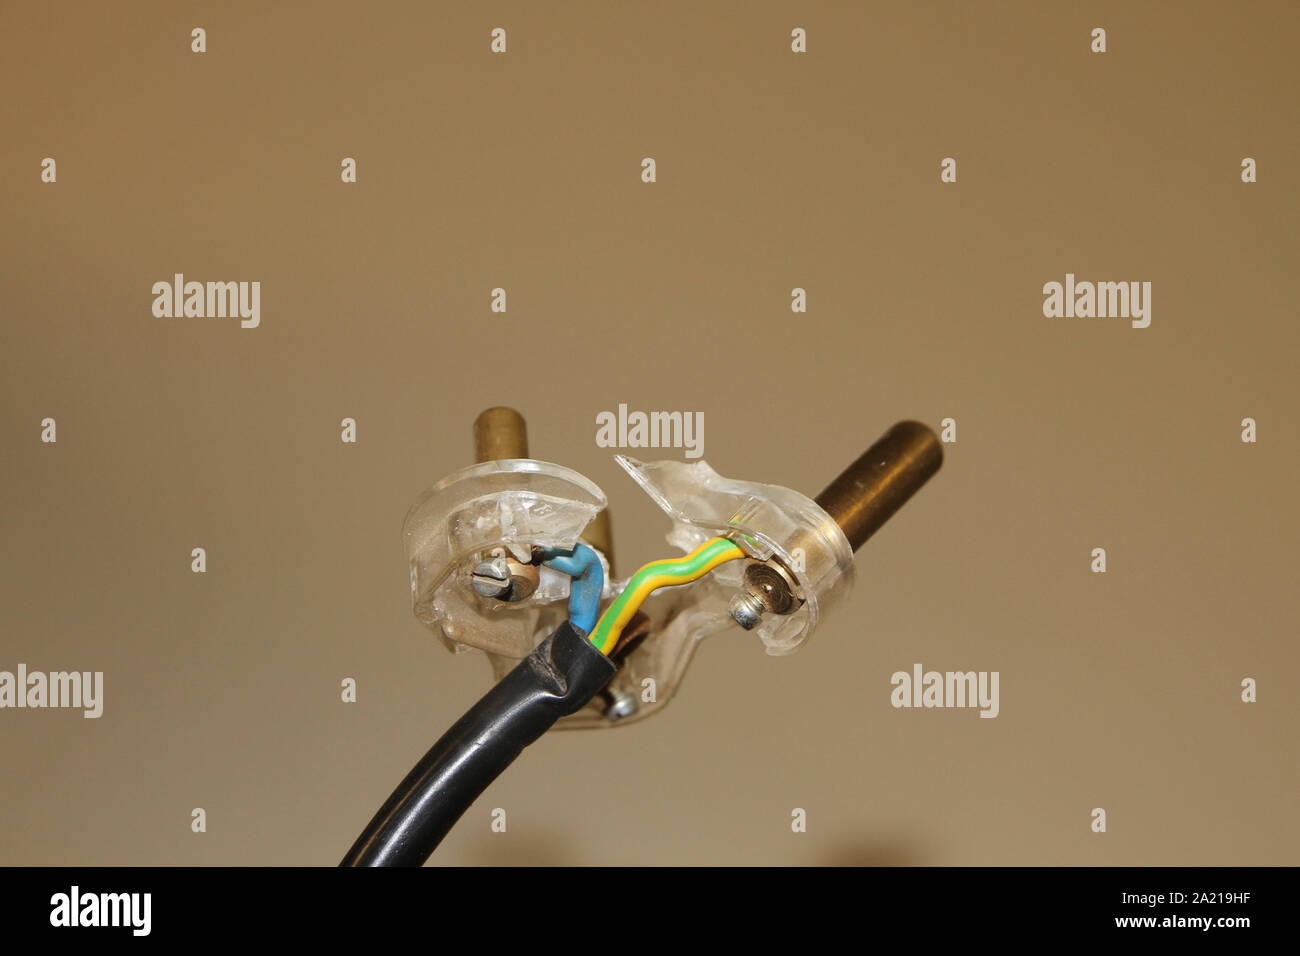 Broken 3-pin plug against cream background, South Africa. Stock Photo